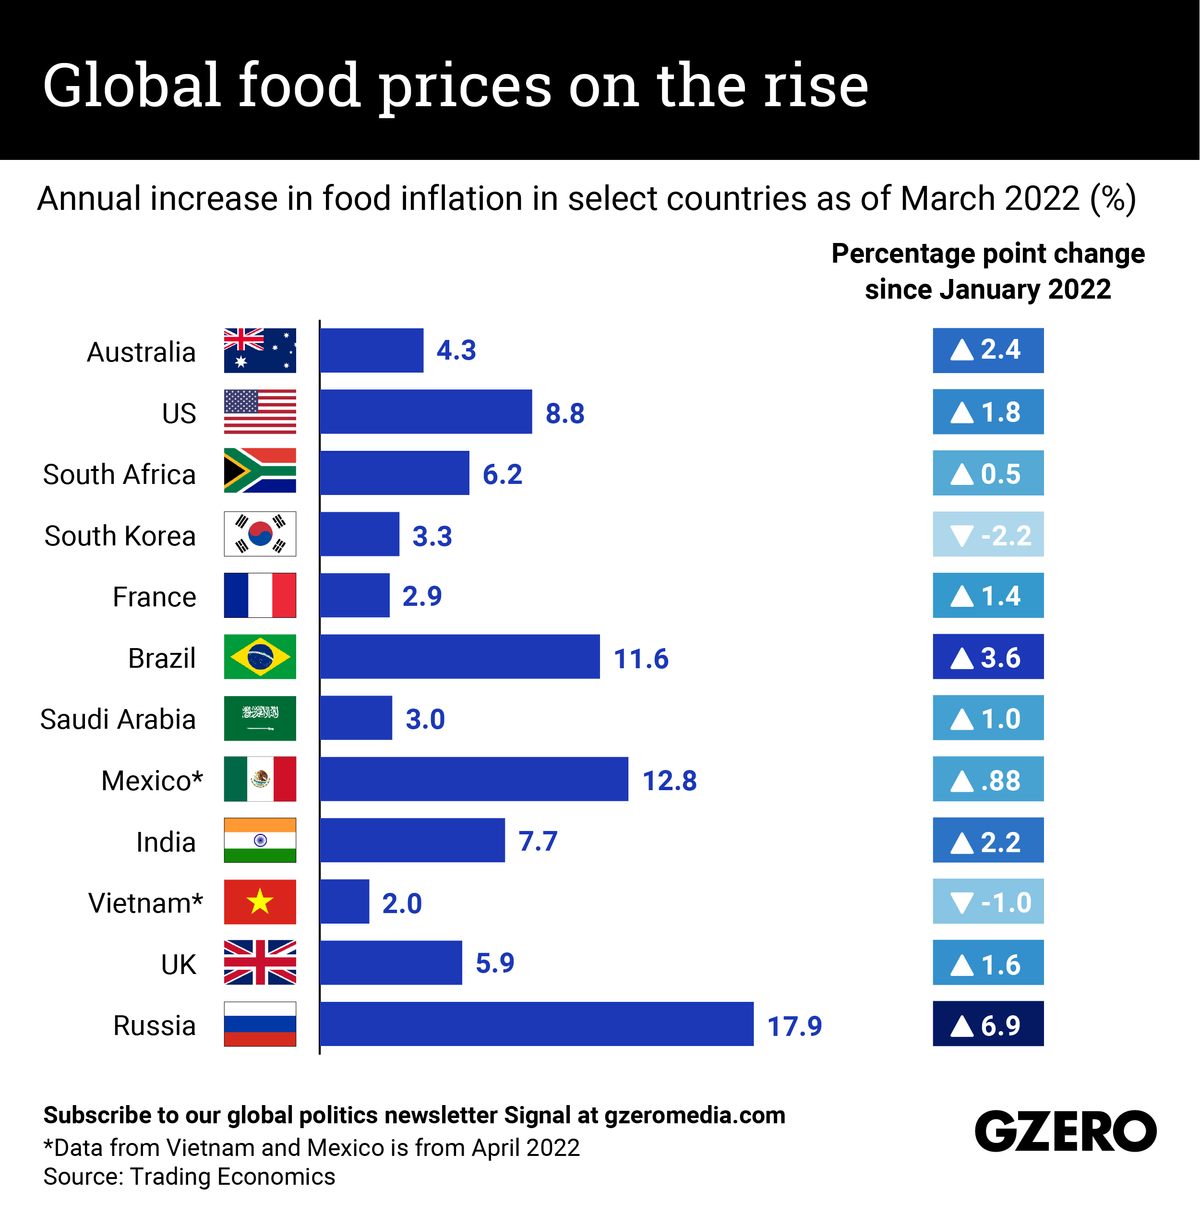 The Graphic Truth: Global food prices on the rise